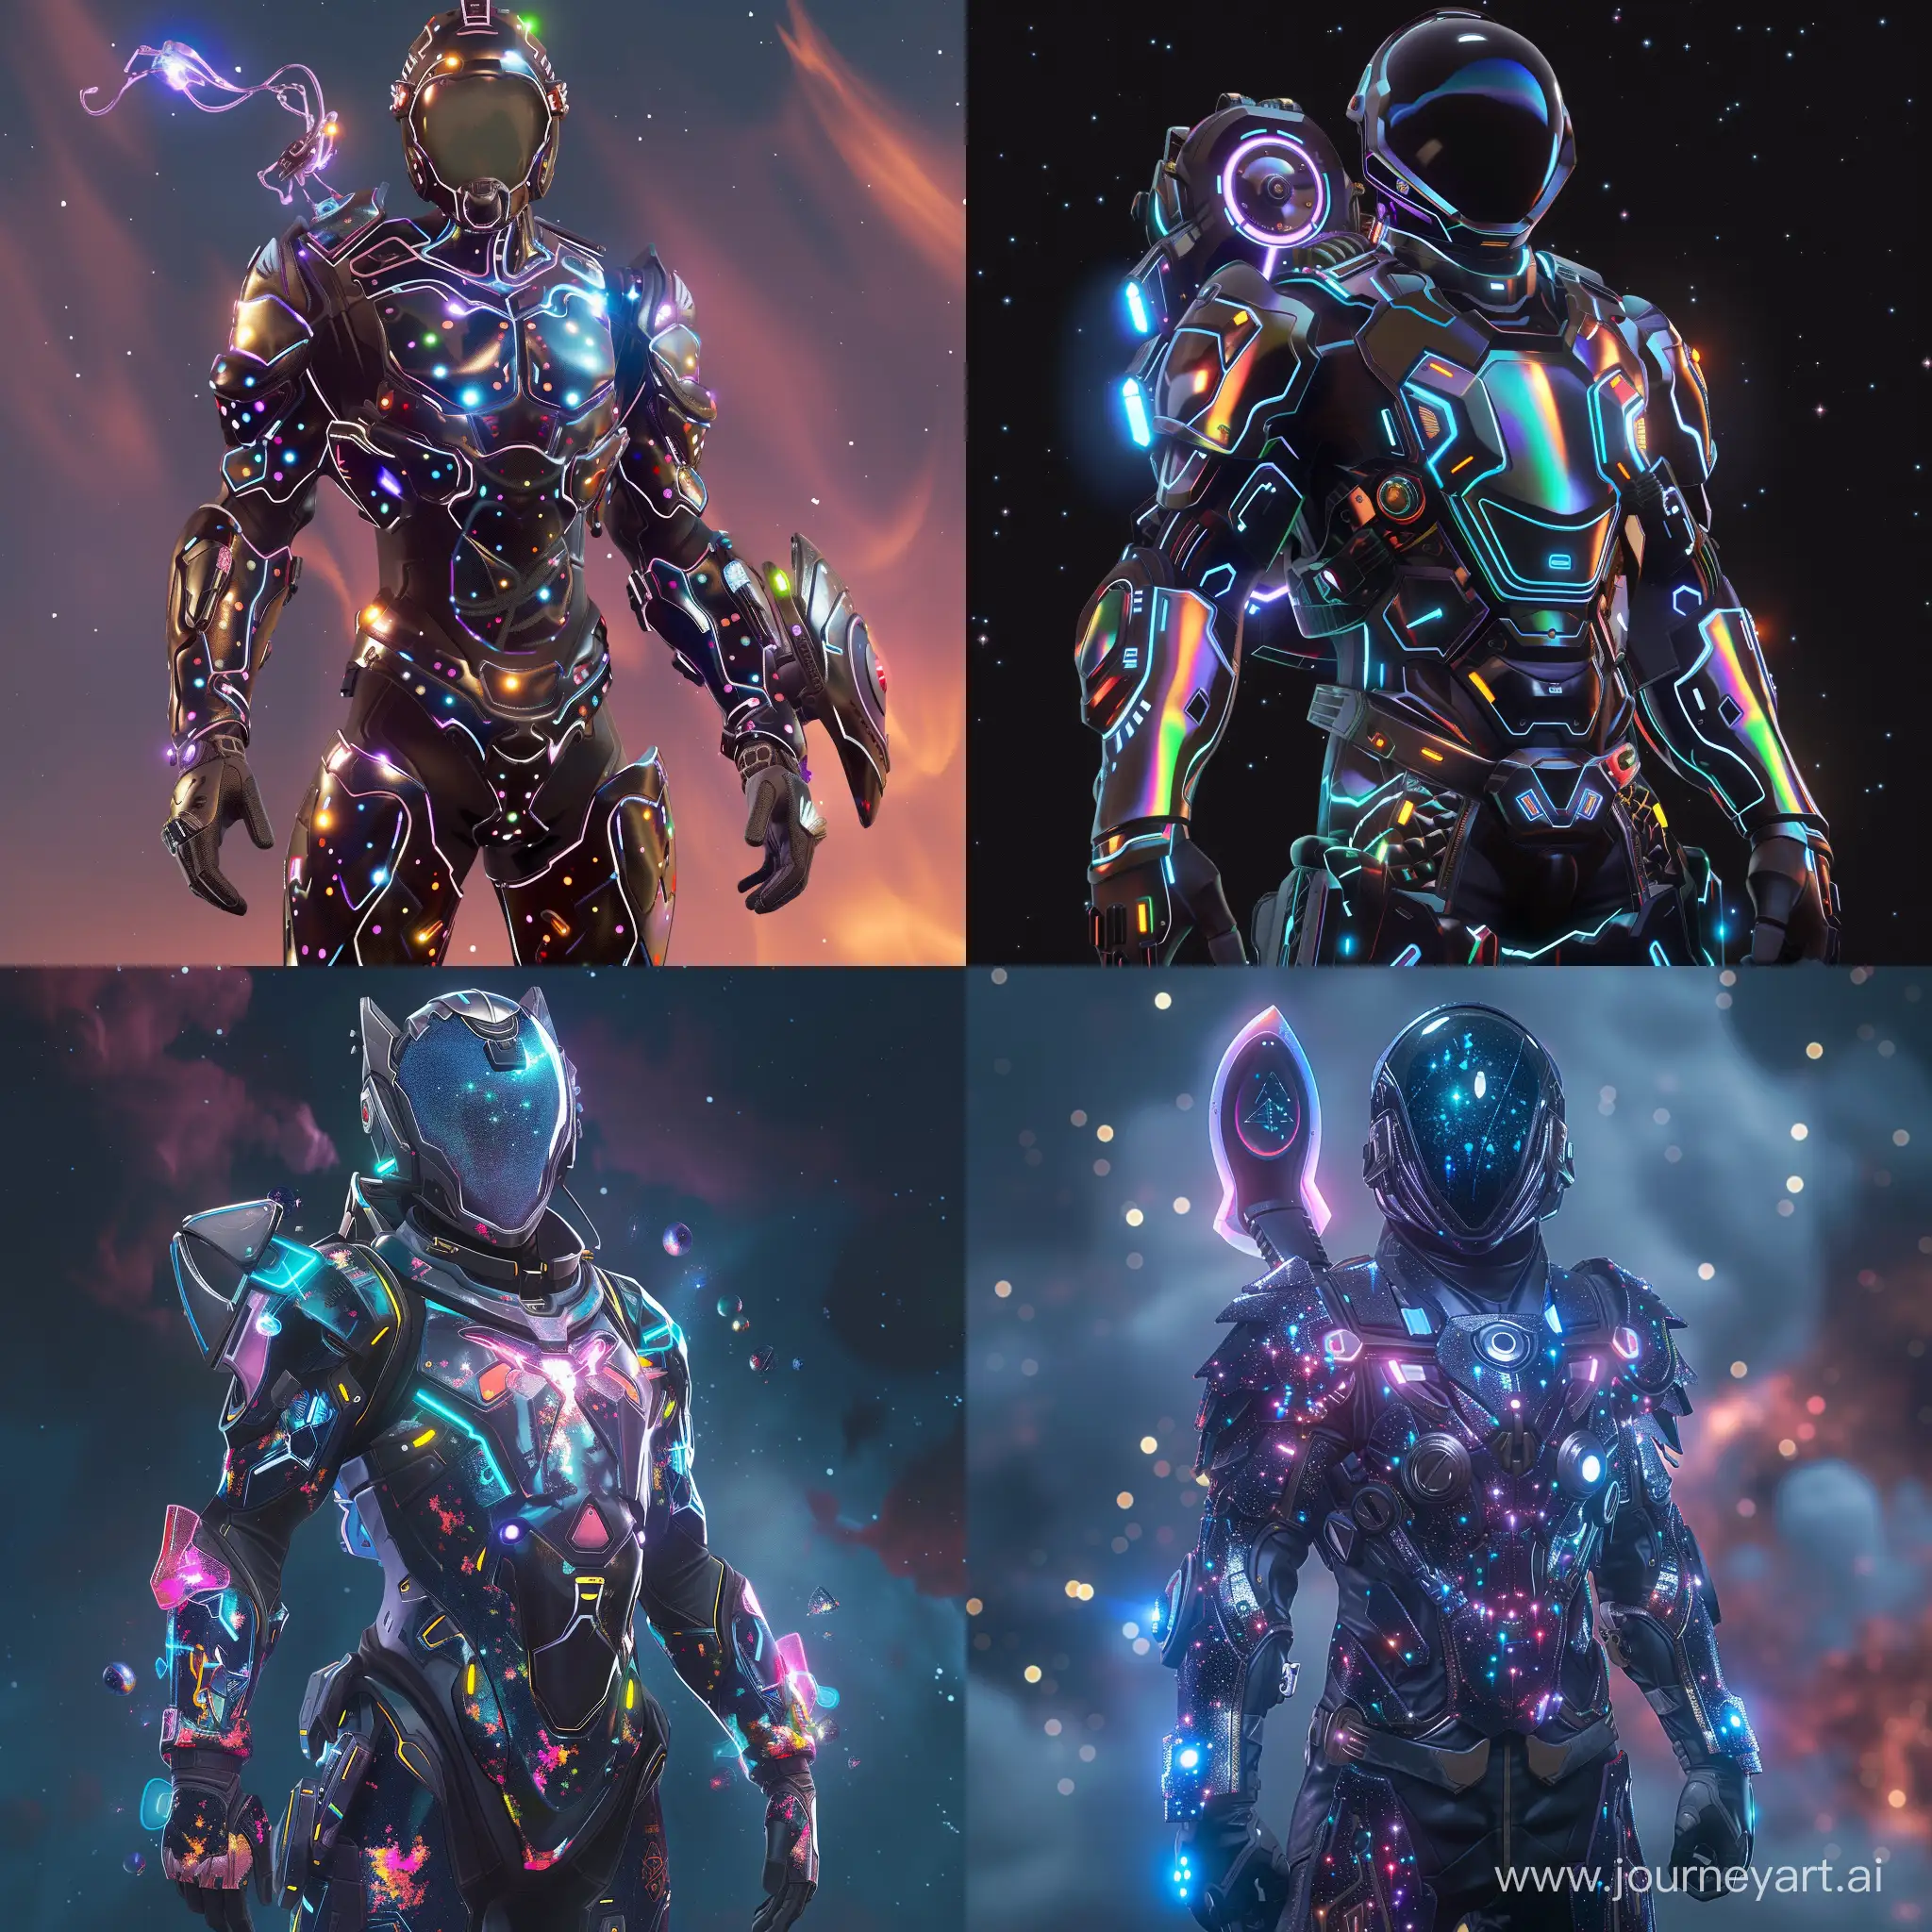 Futuristic-Galactic-Guardian-Warrior-with-Cosmic-Armor-and-Energy-Blade